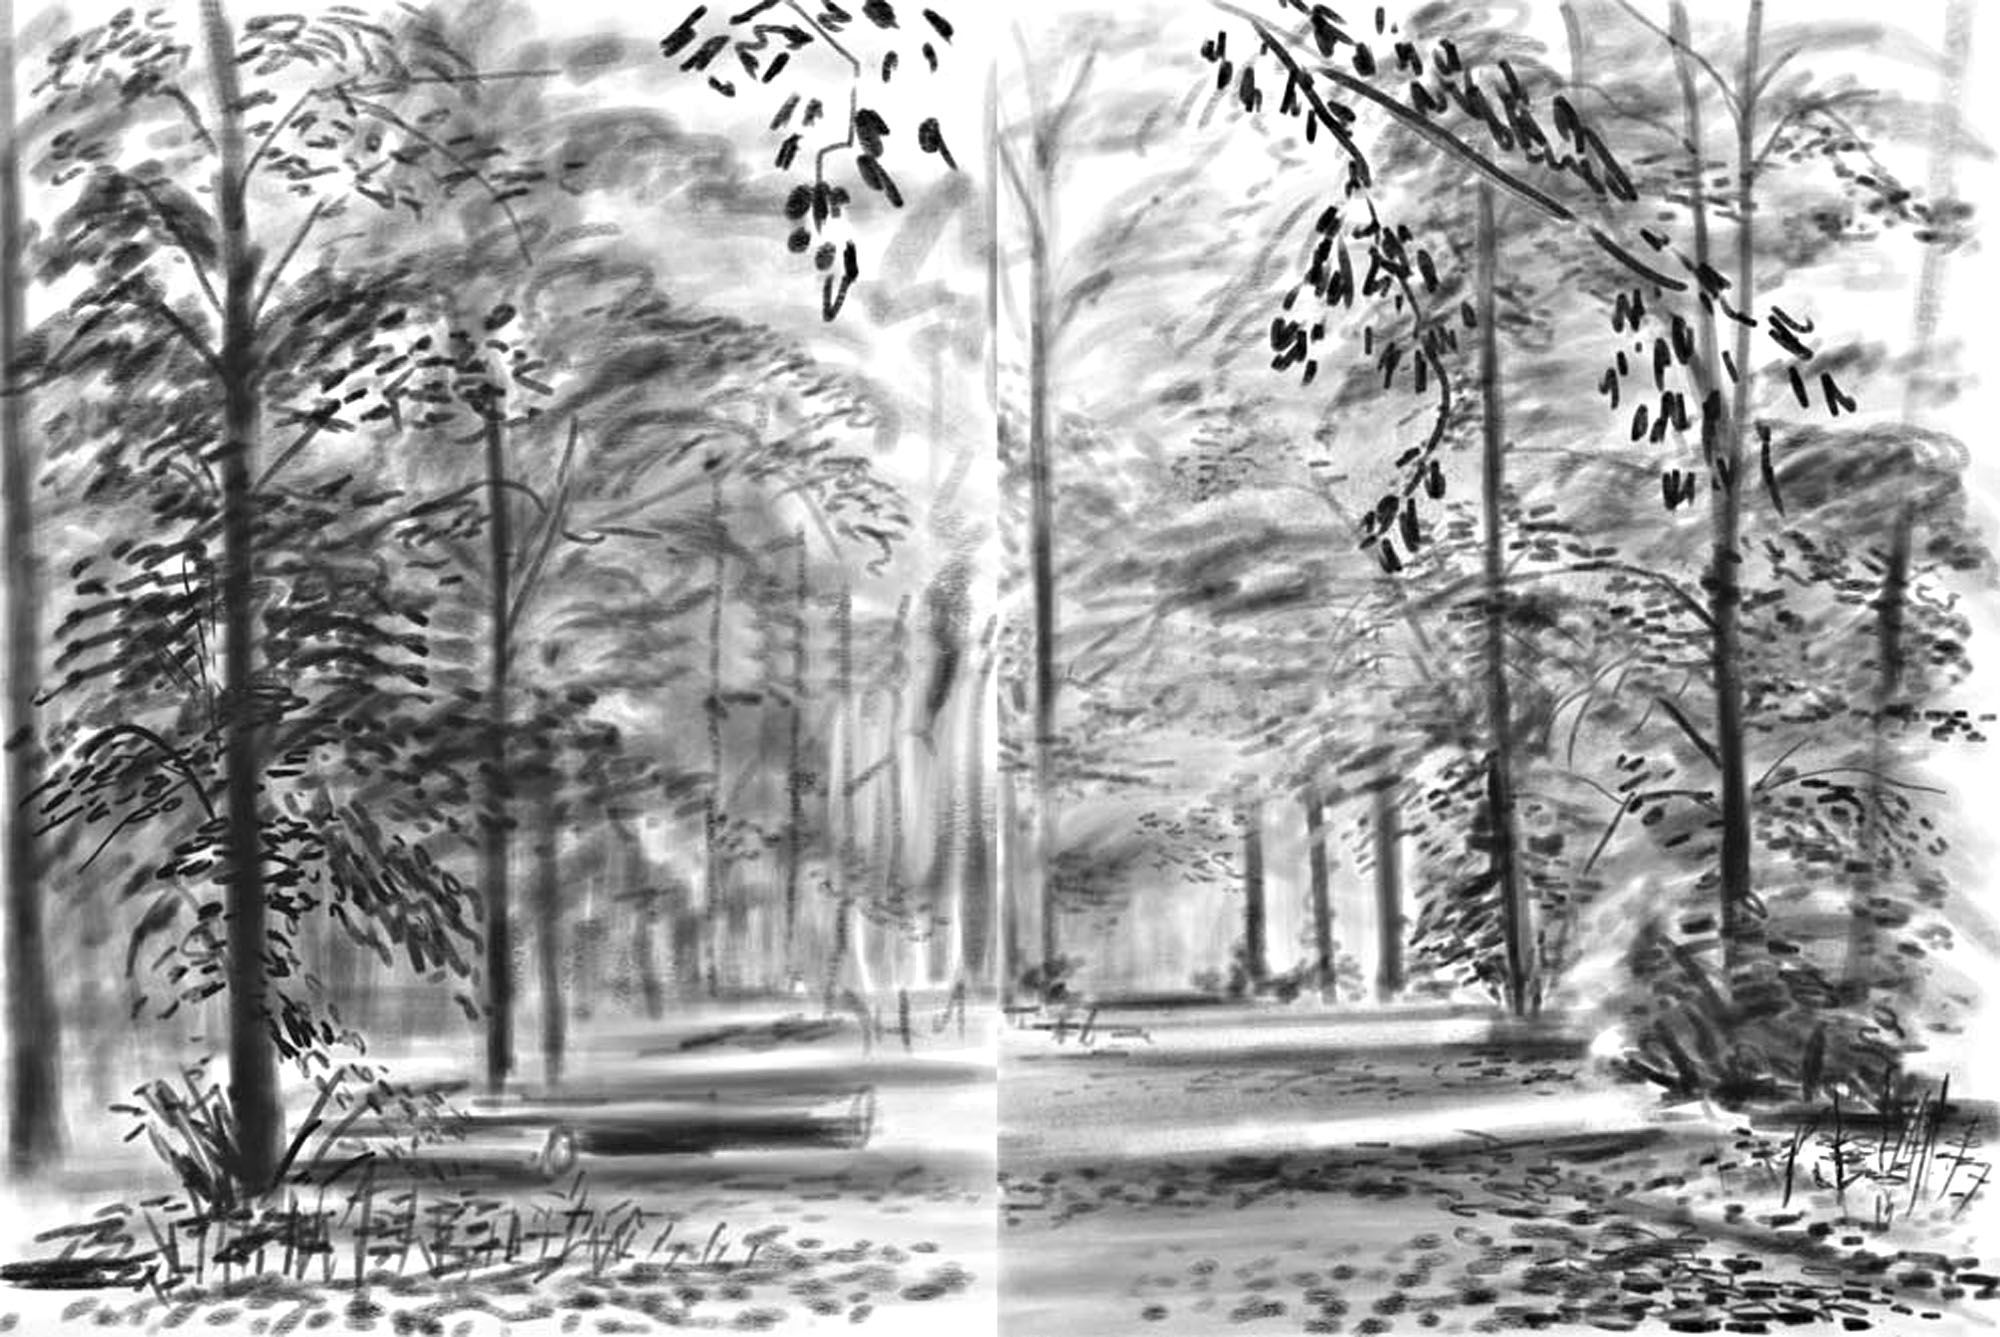 Andy Maitland first iPad drawing drawn across two iPad canvases, black and white